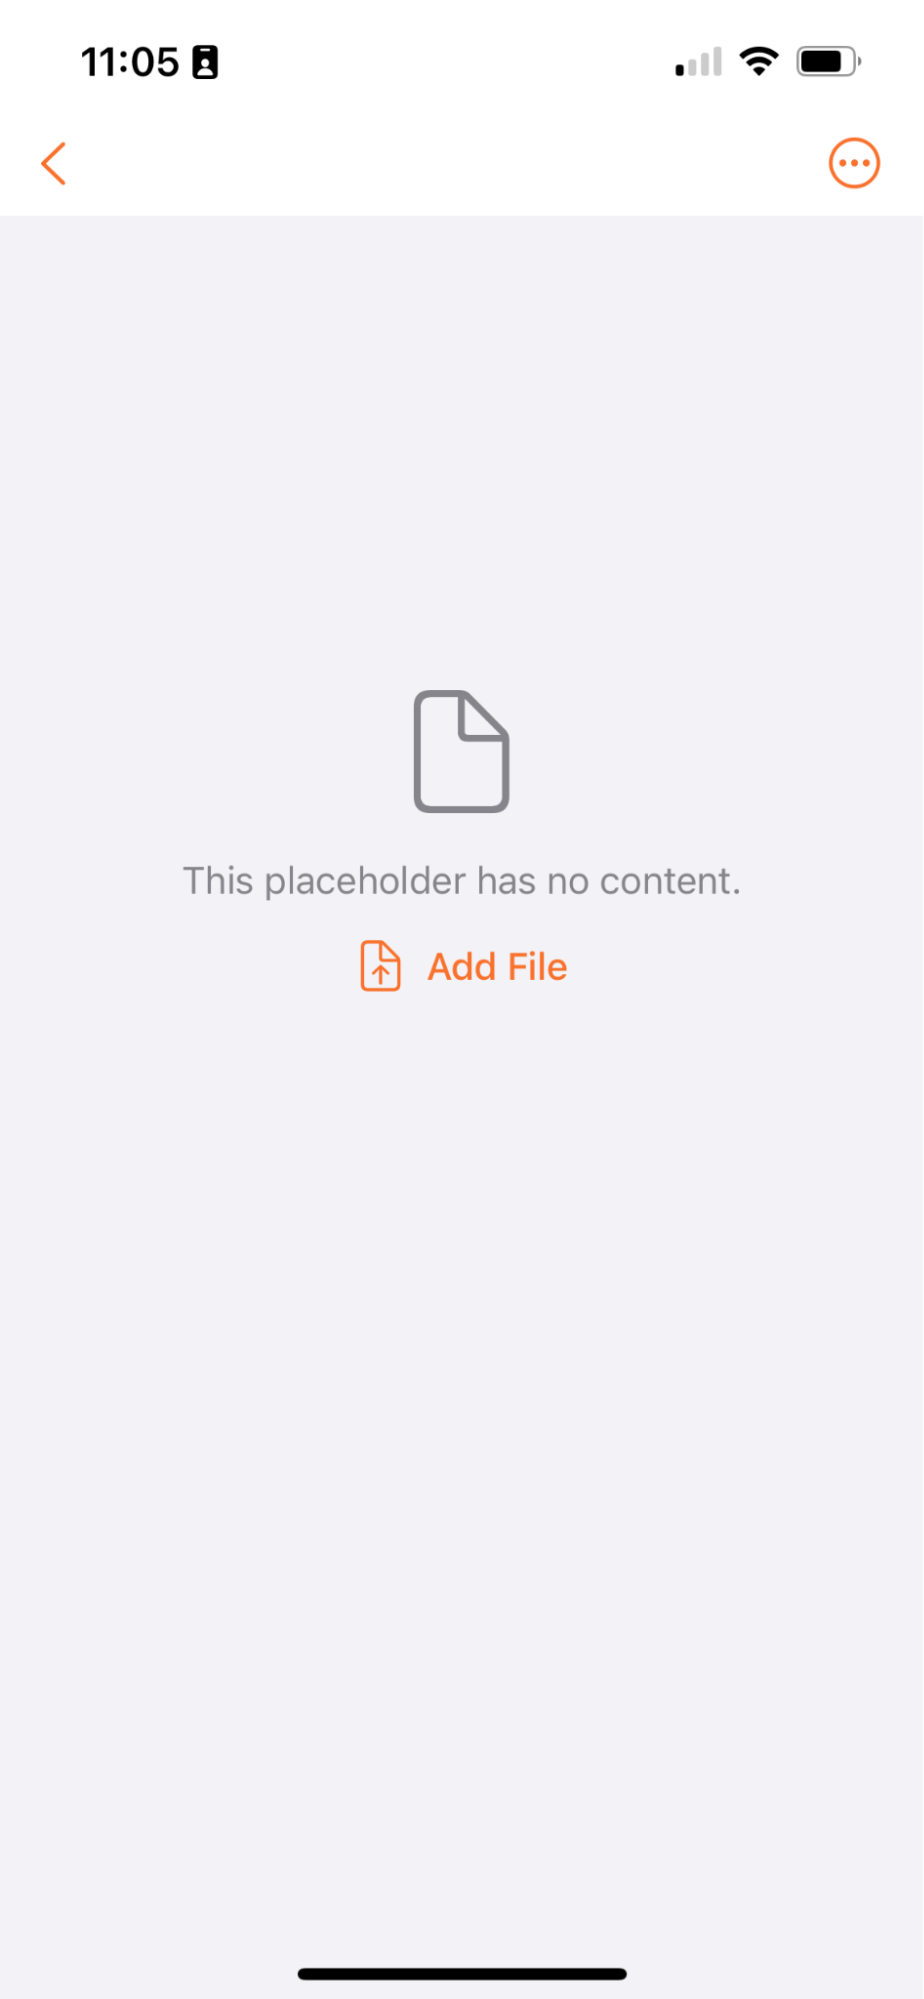 Add content to placeholders